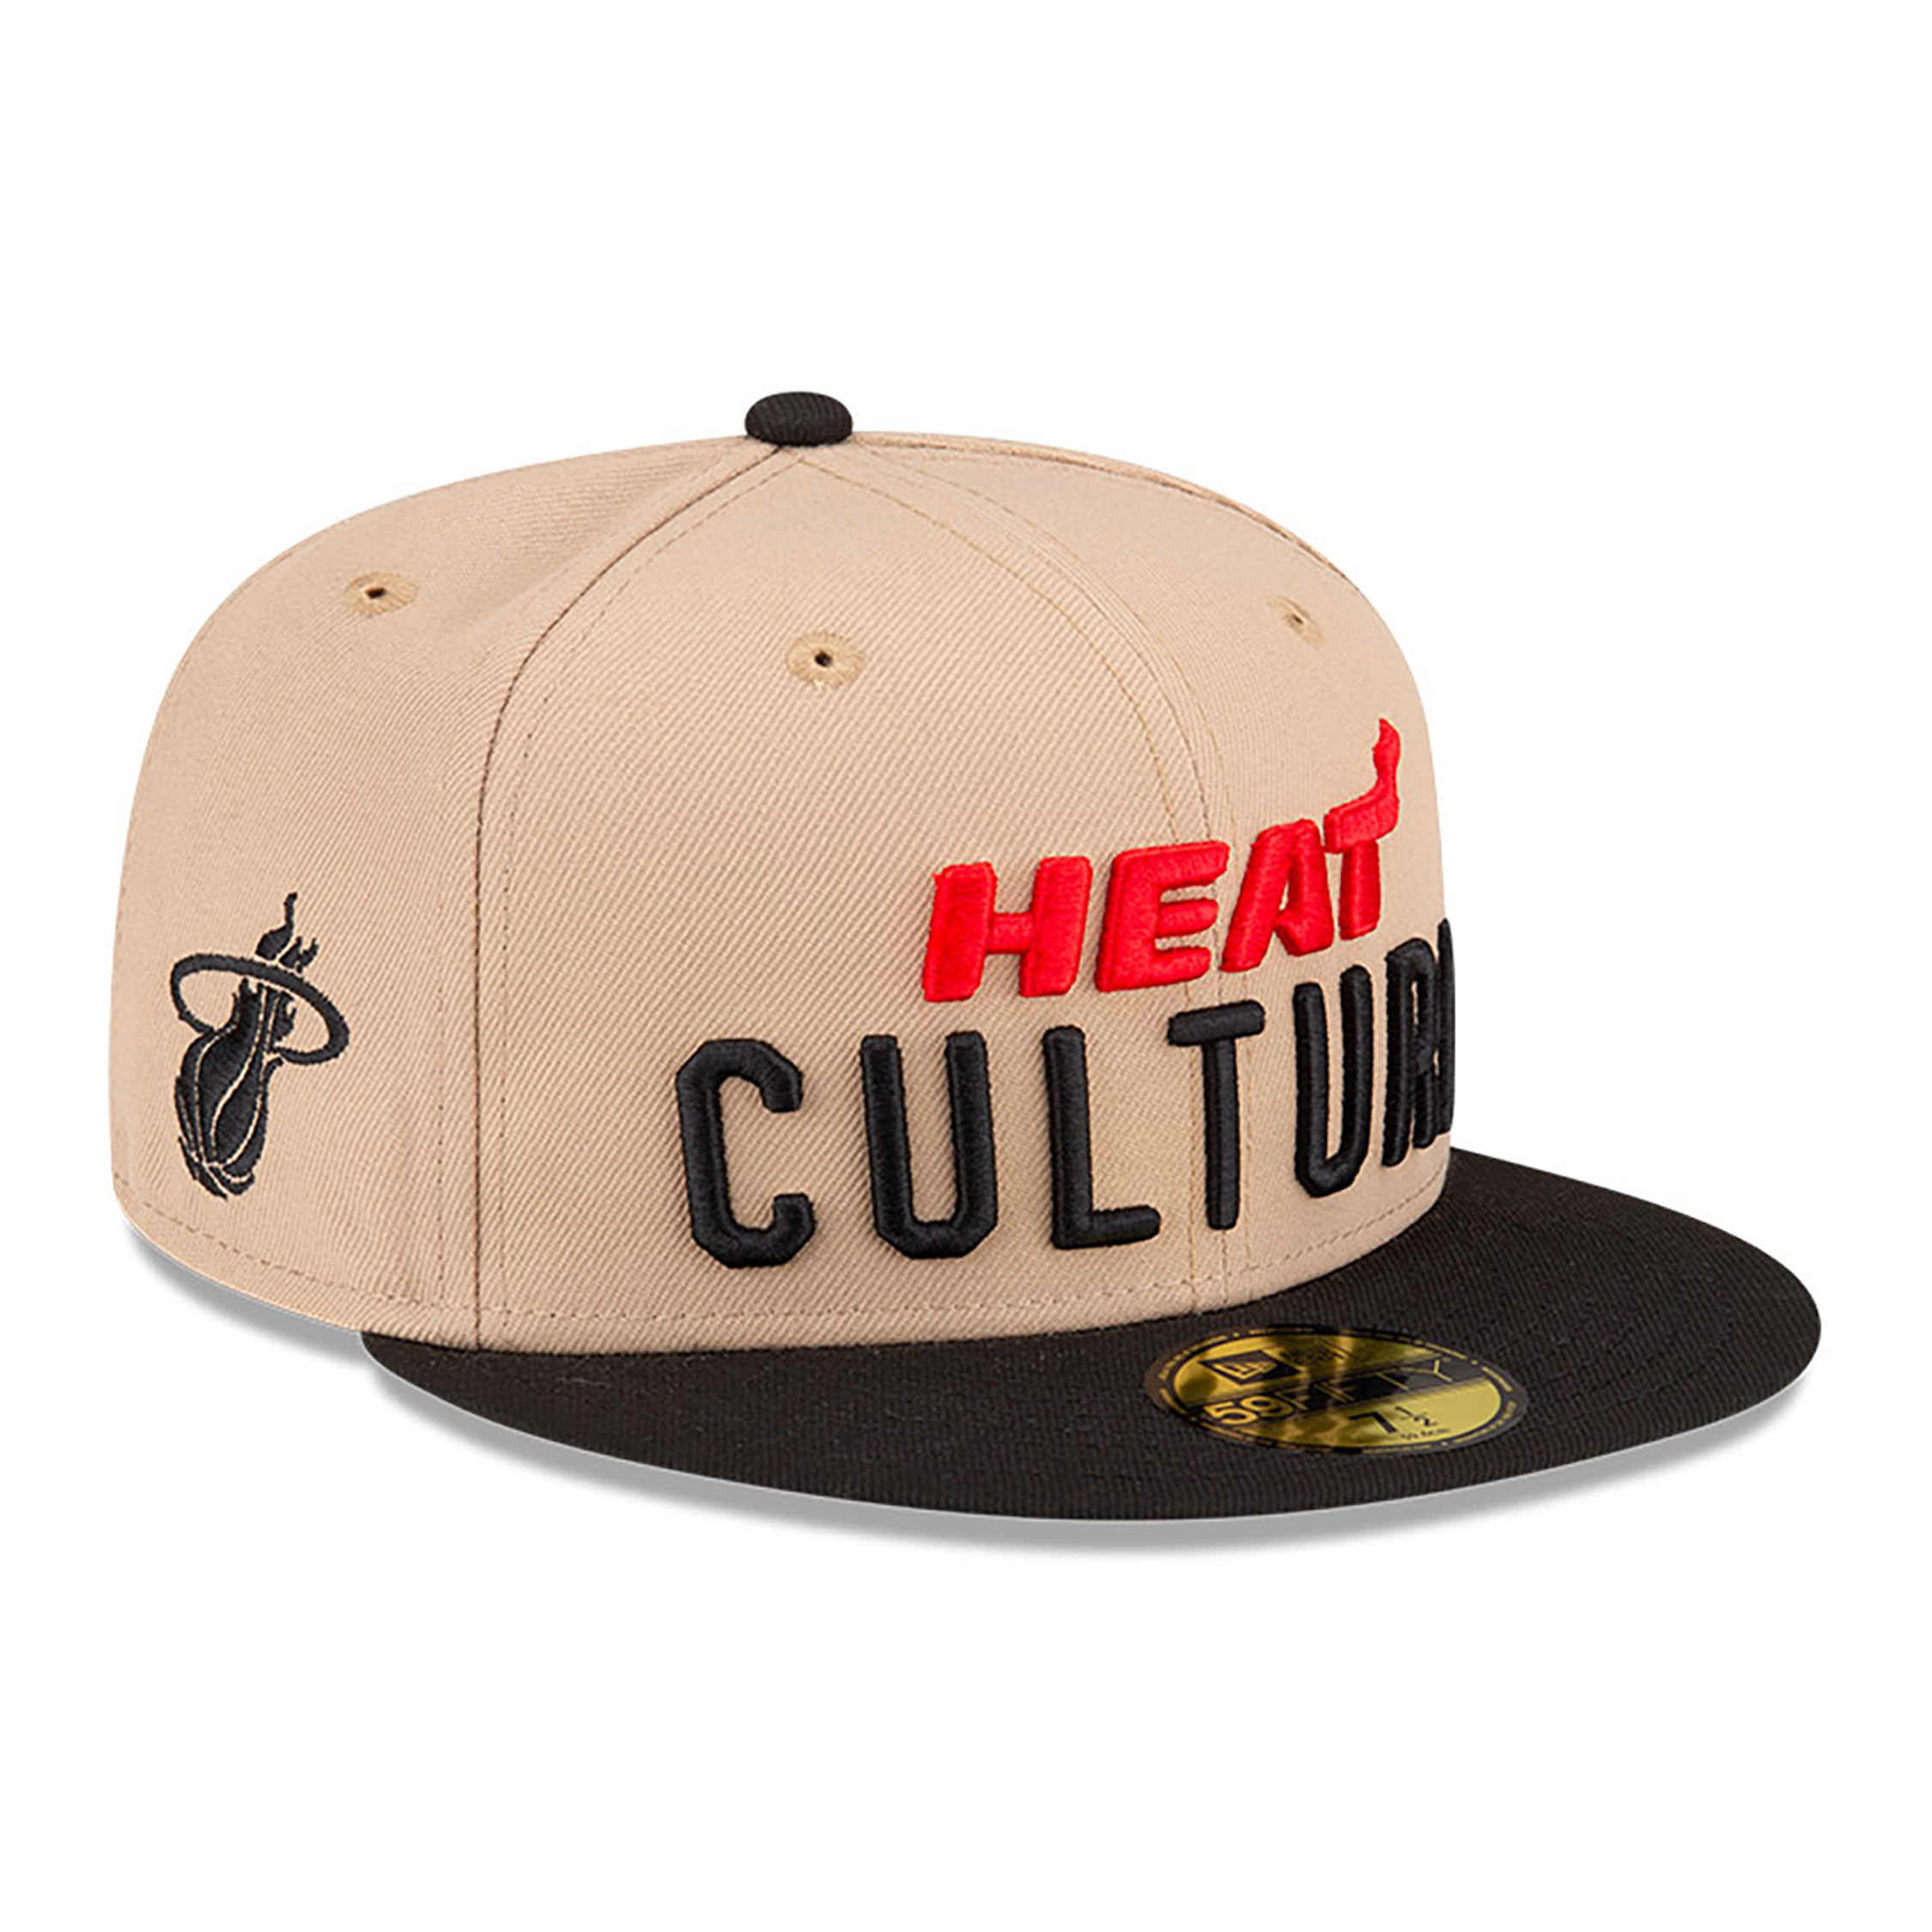 Miami Heat NBA City Edition Beige 59FIFTY Fitted Cap